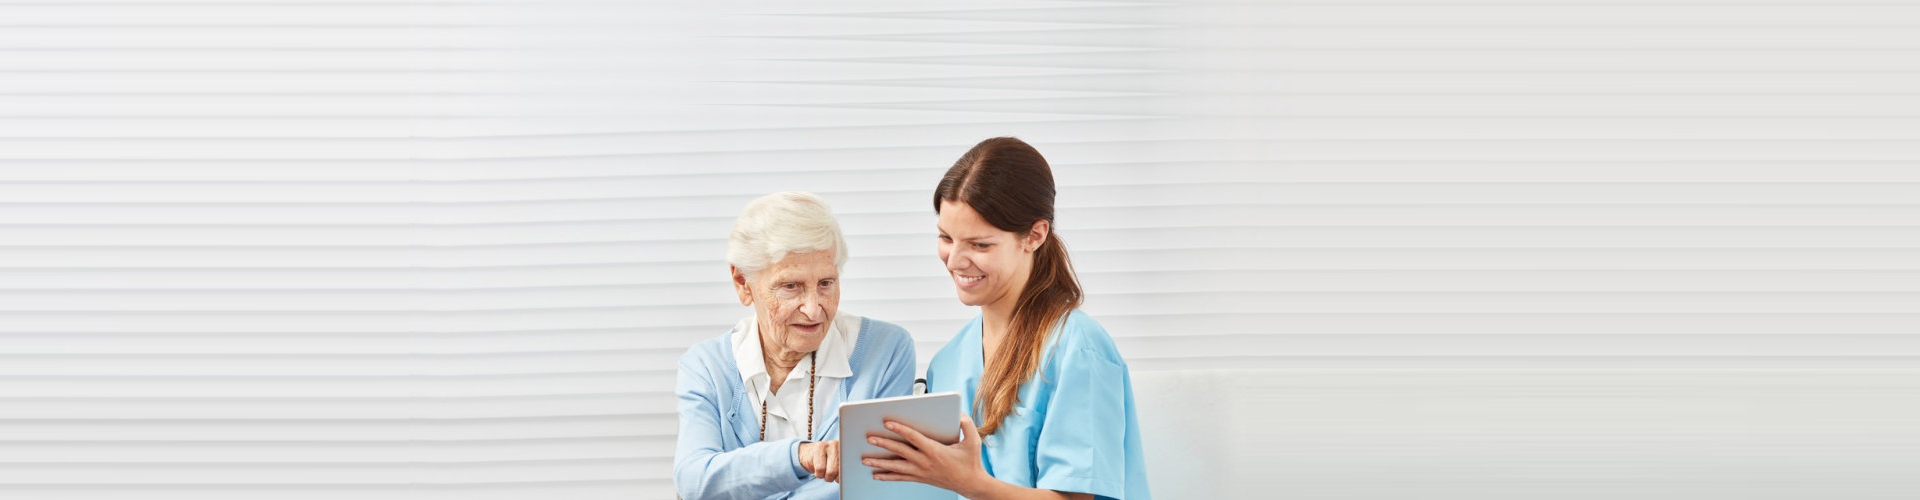 caregiver helping patient with her ipad